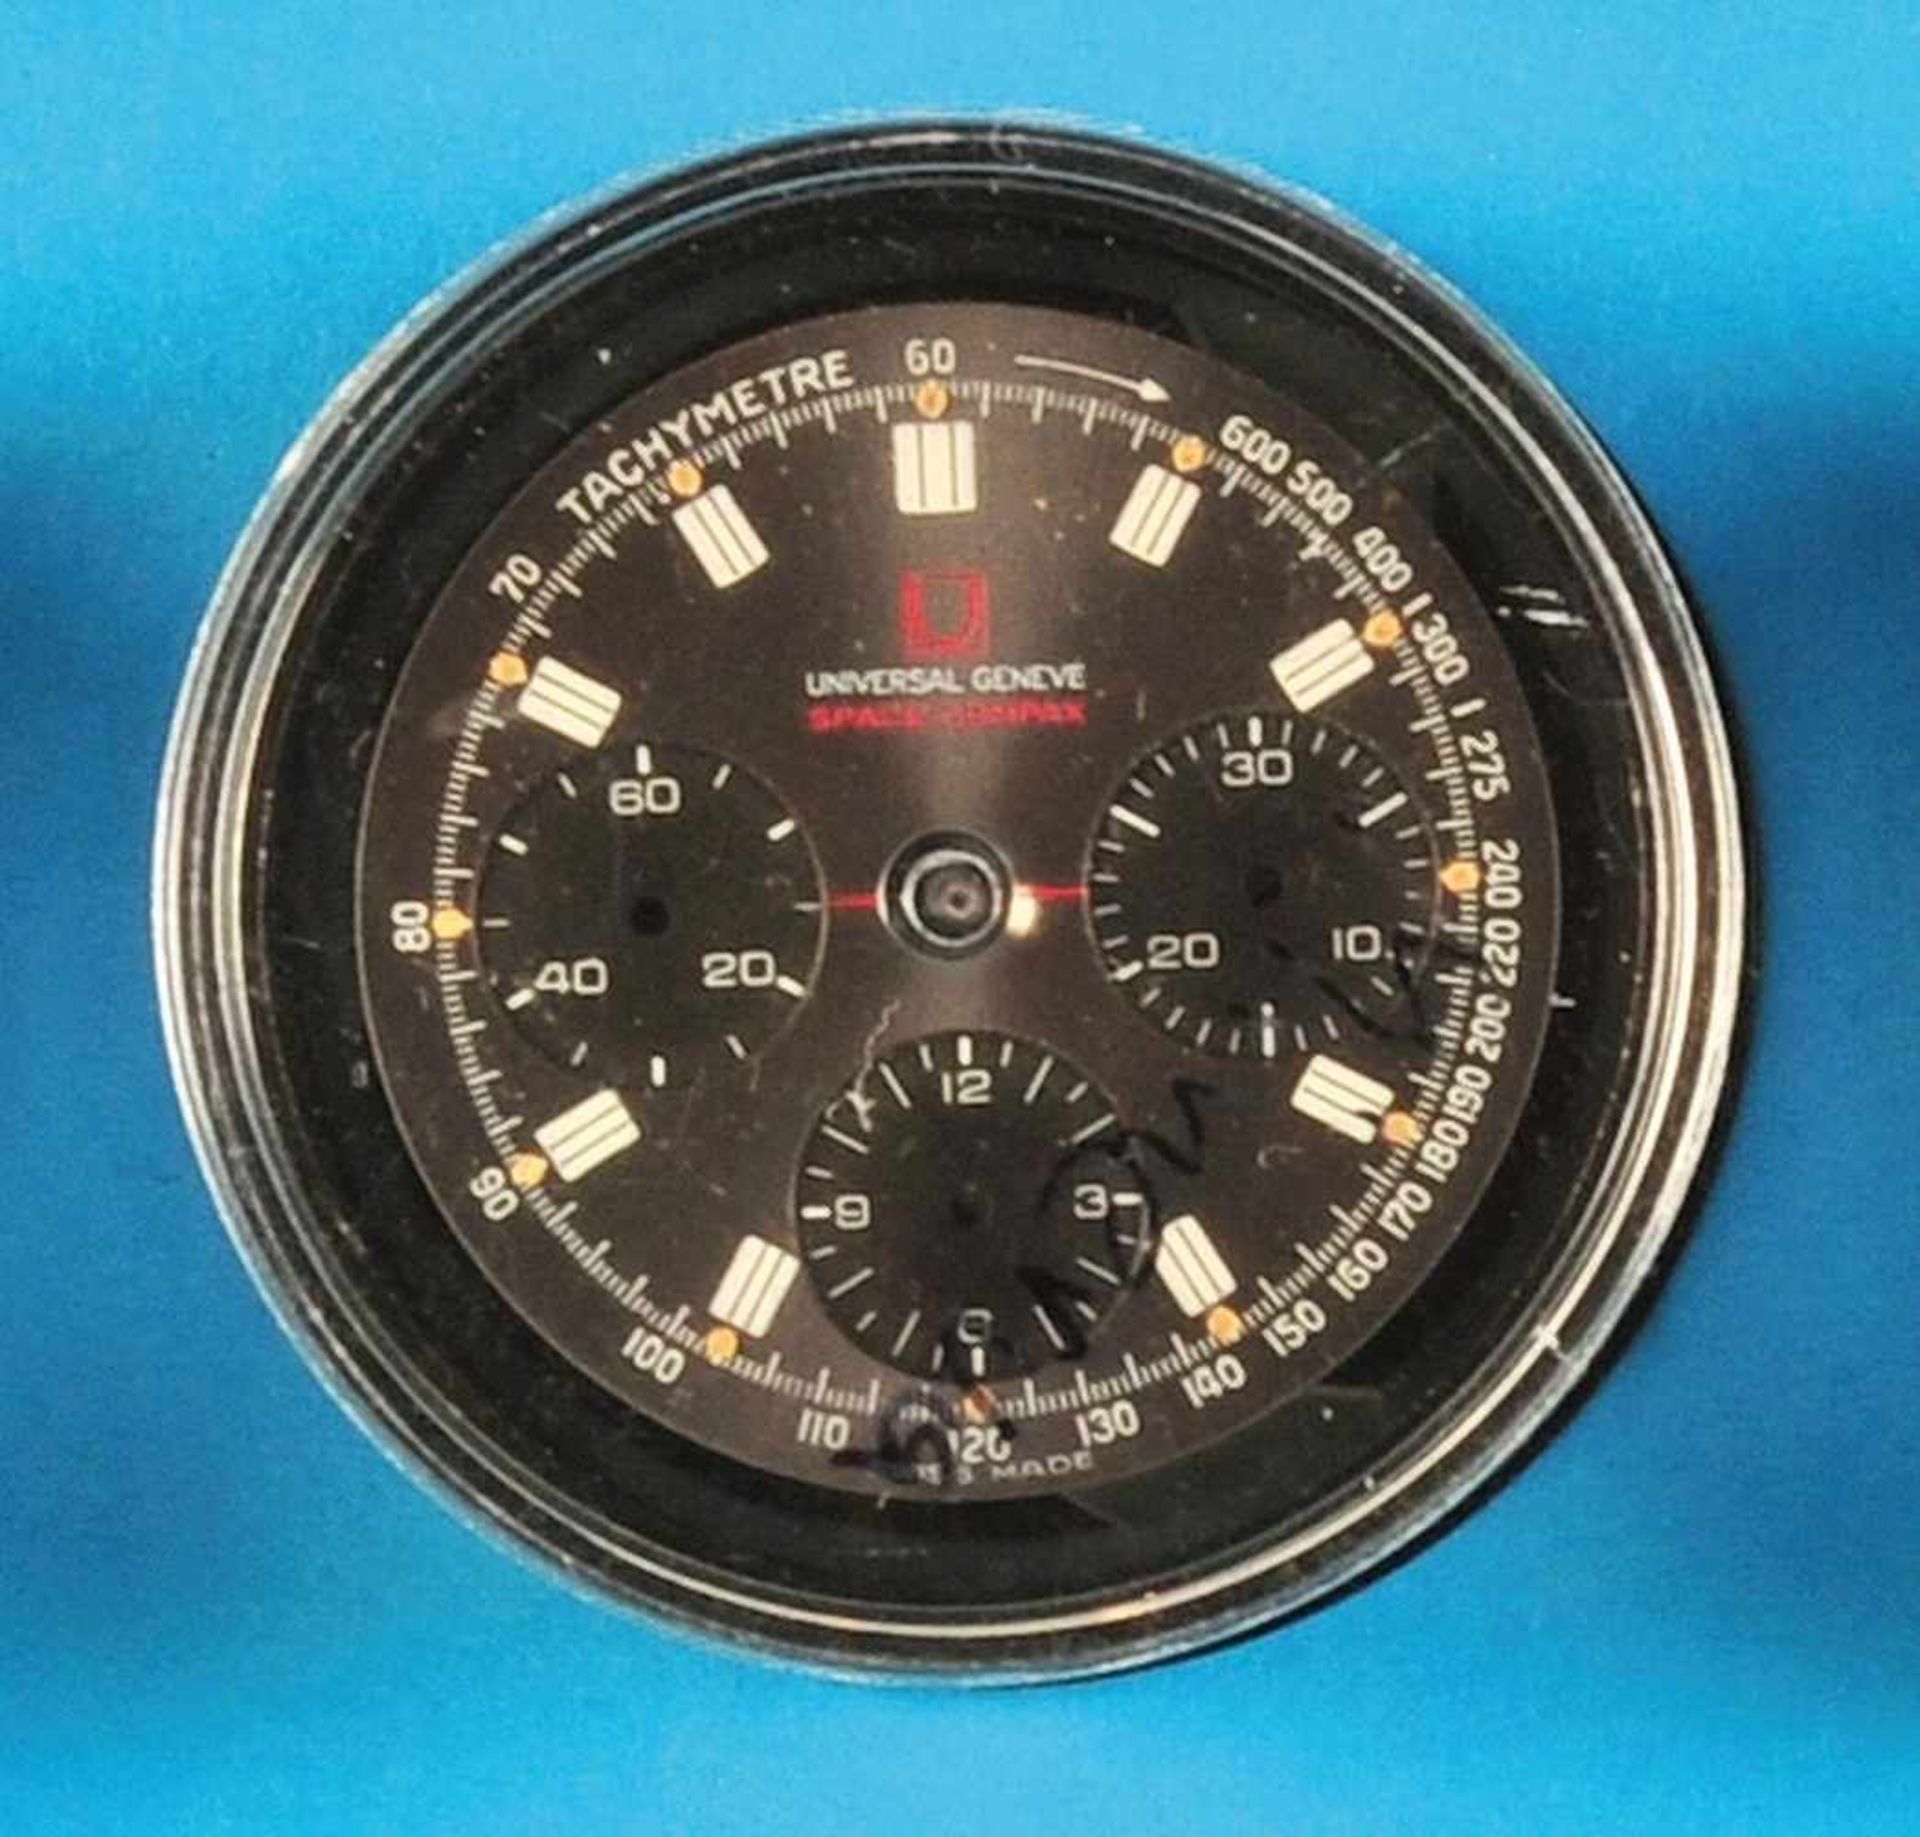 Universal "Space-Compax" watch dial